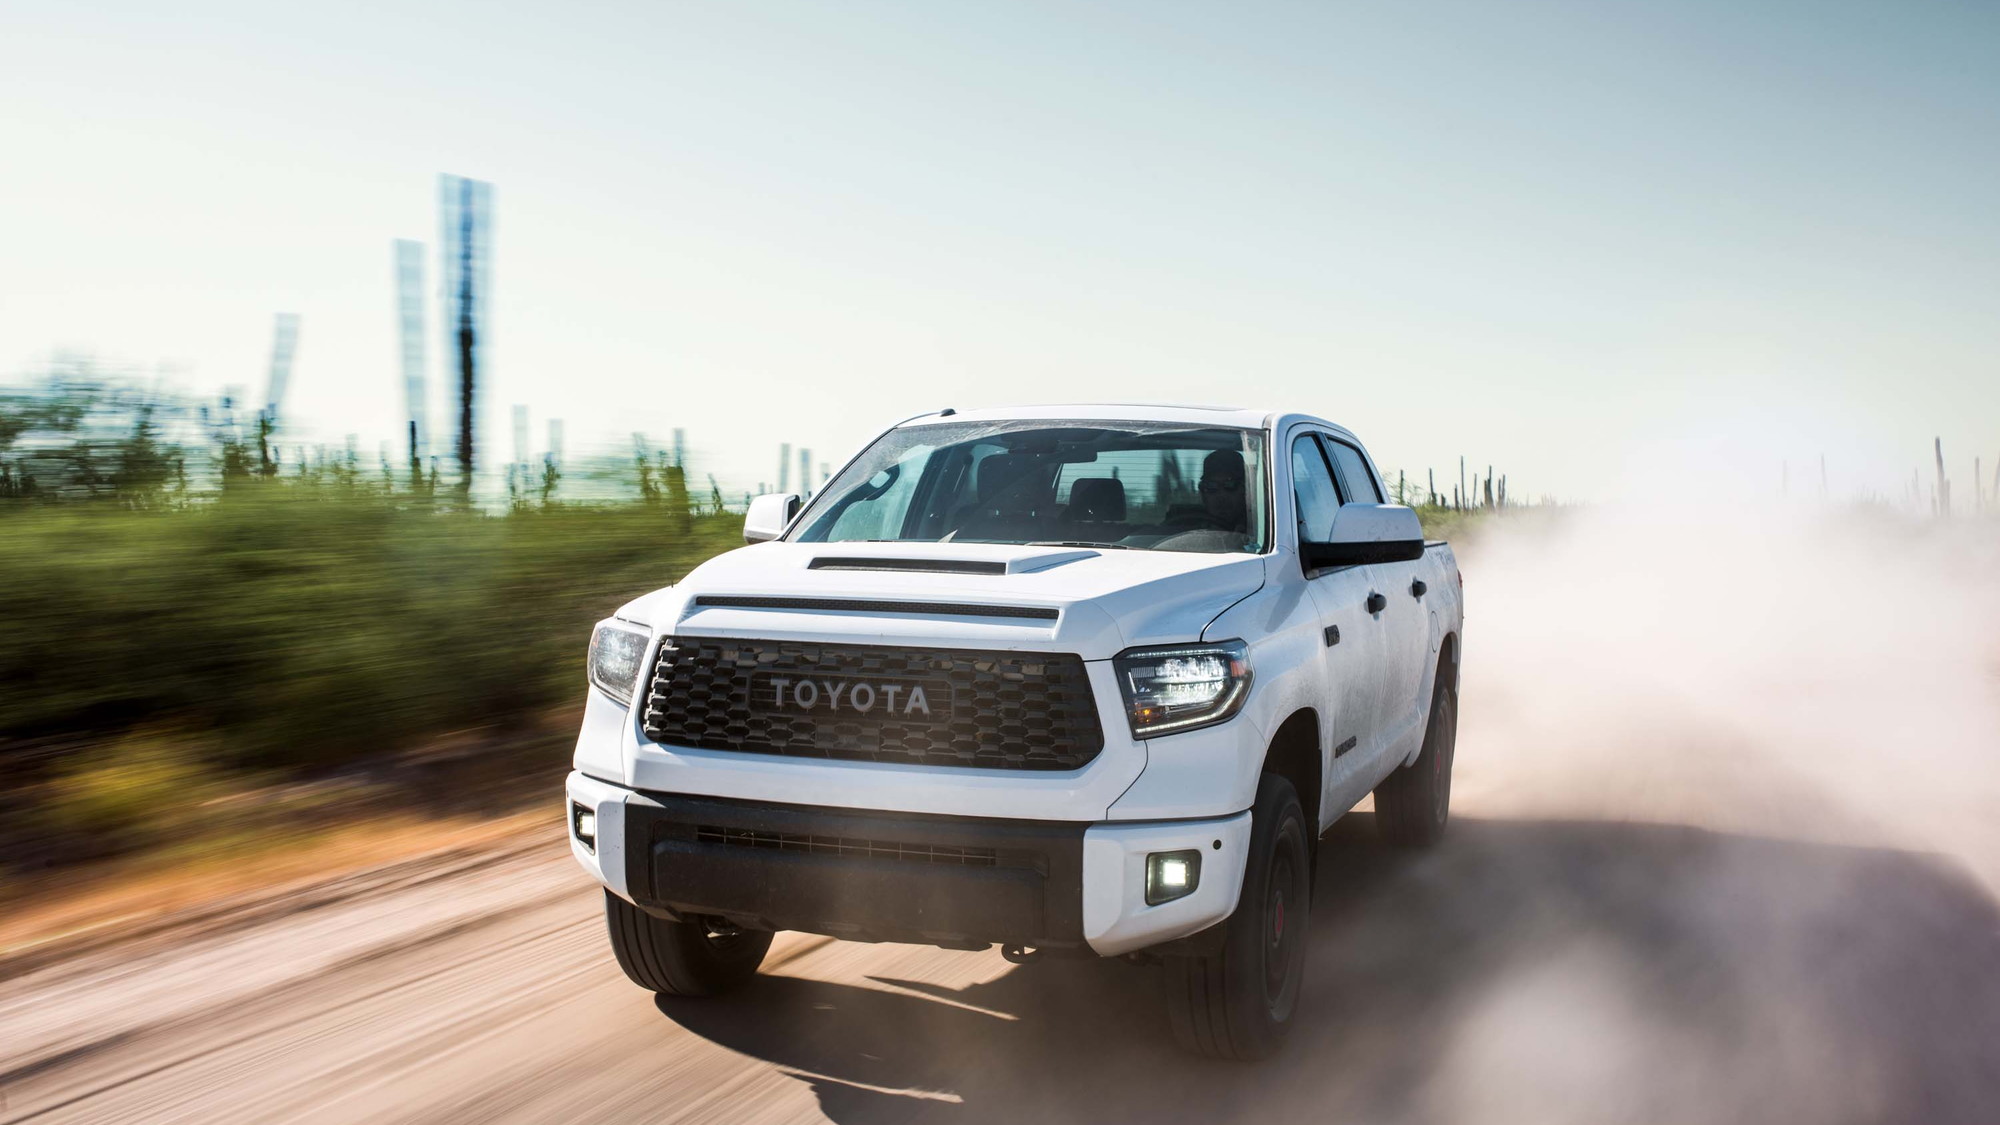 416Best 2018 toyota tundra trd pro supercharger for Touring